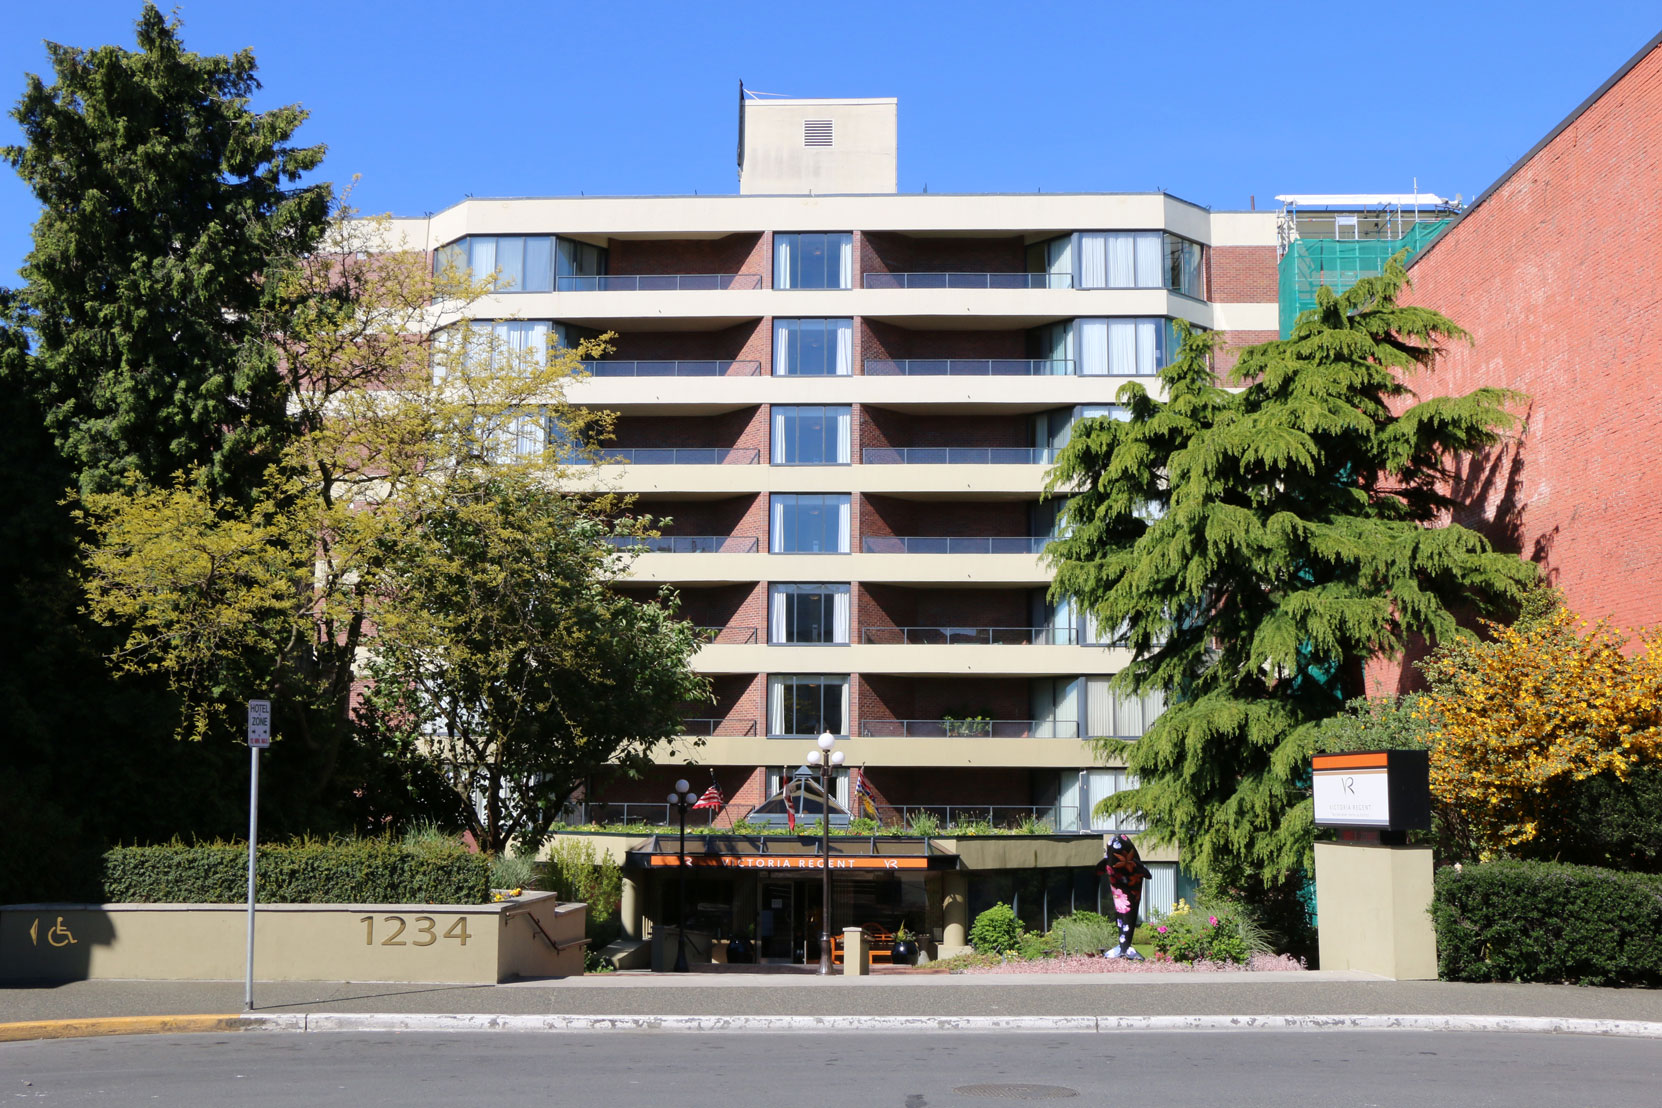 1234 Wharf Street, built in 1981 as hotel it is now 53 strata apartments (condominiums)